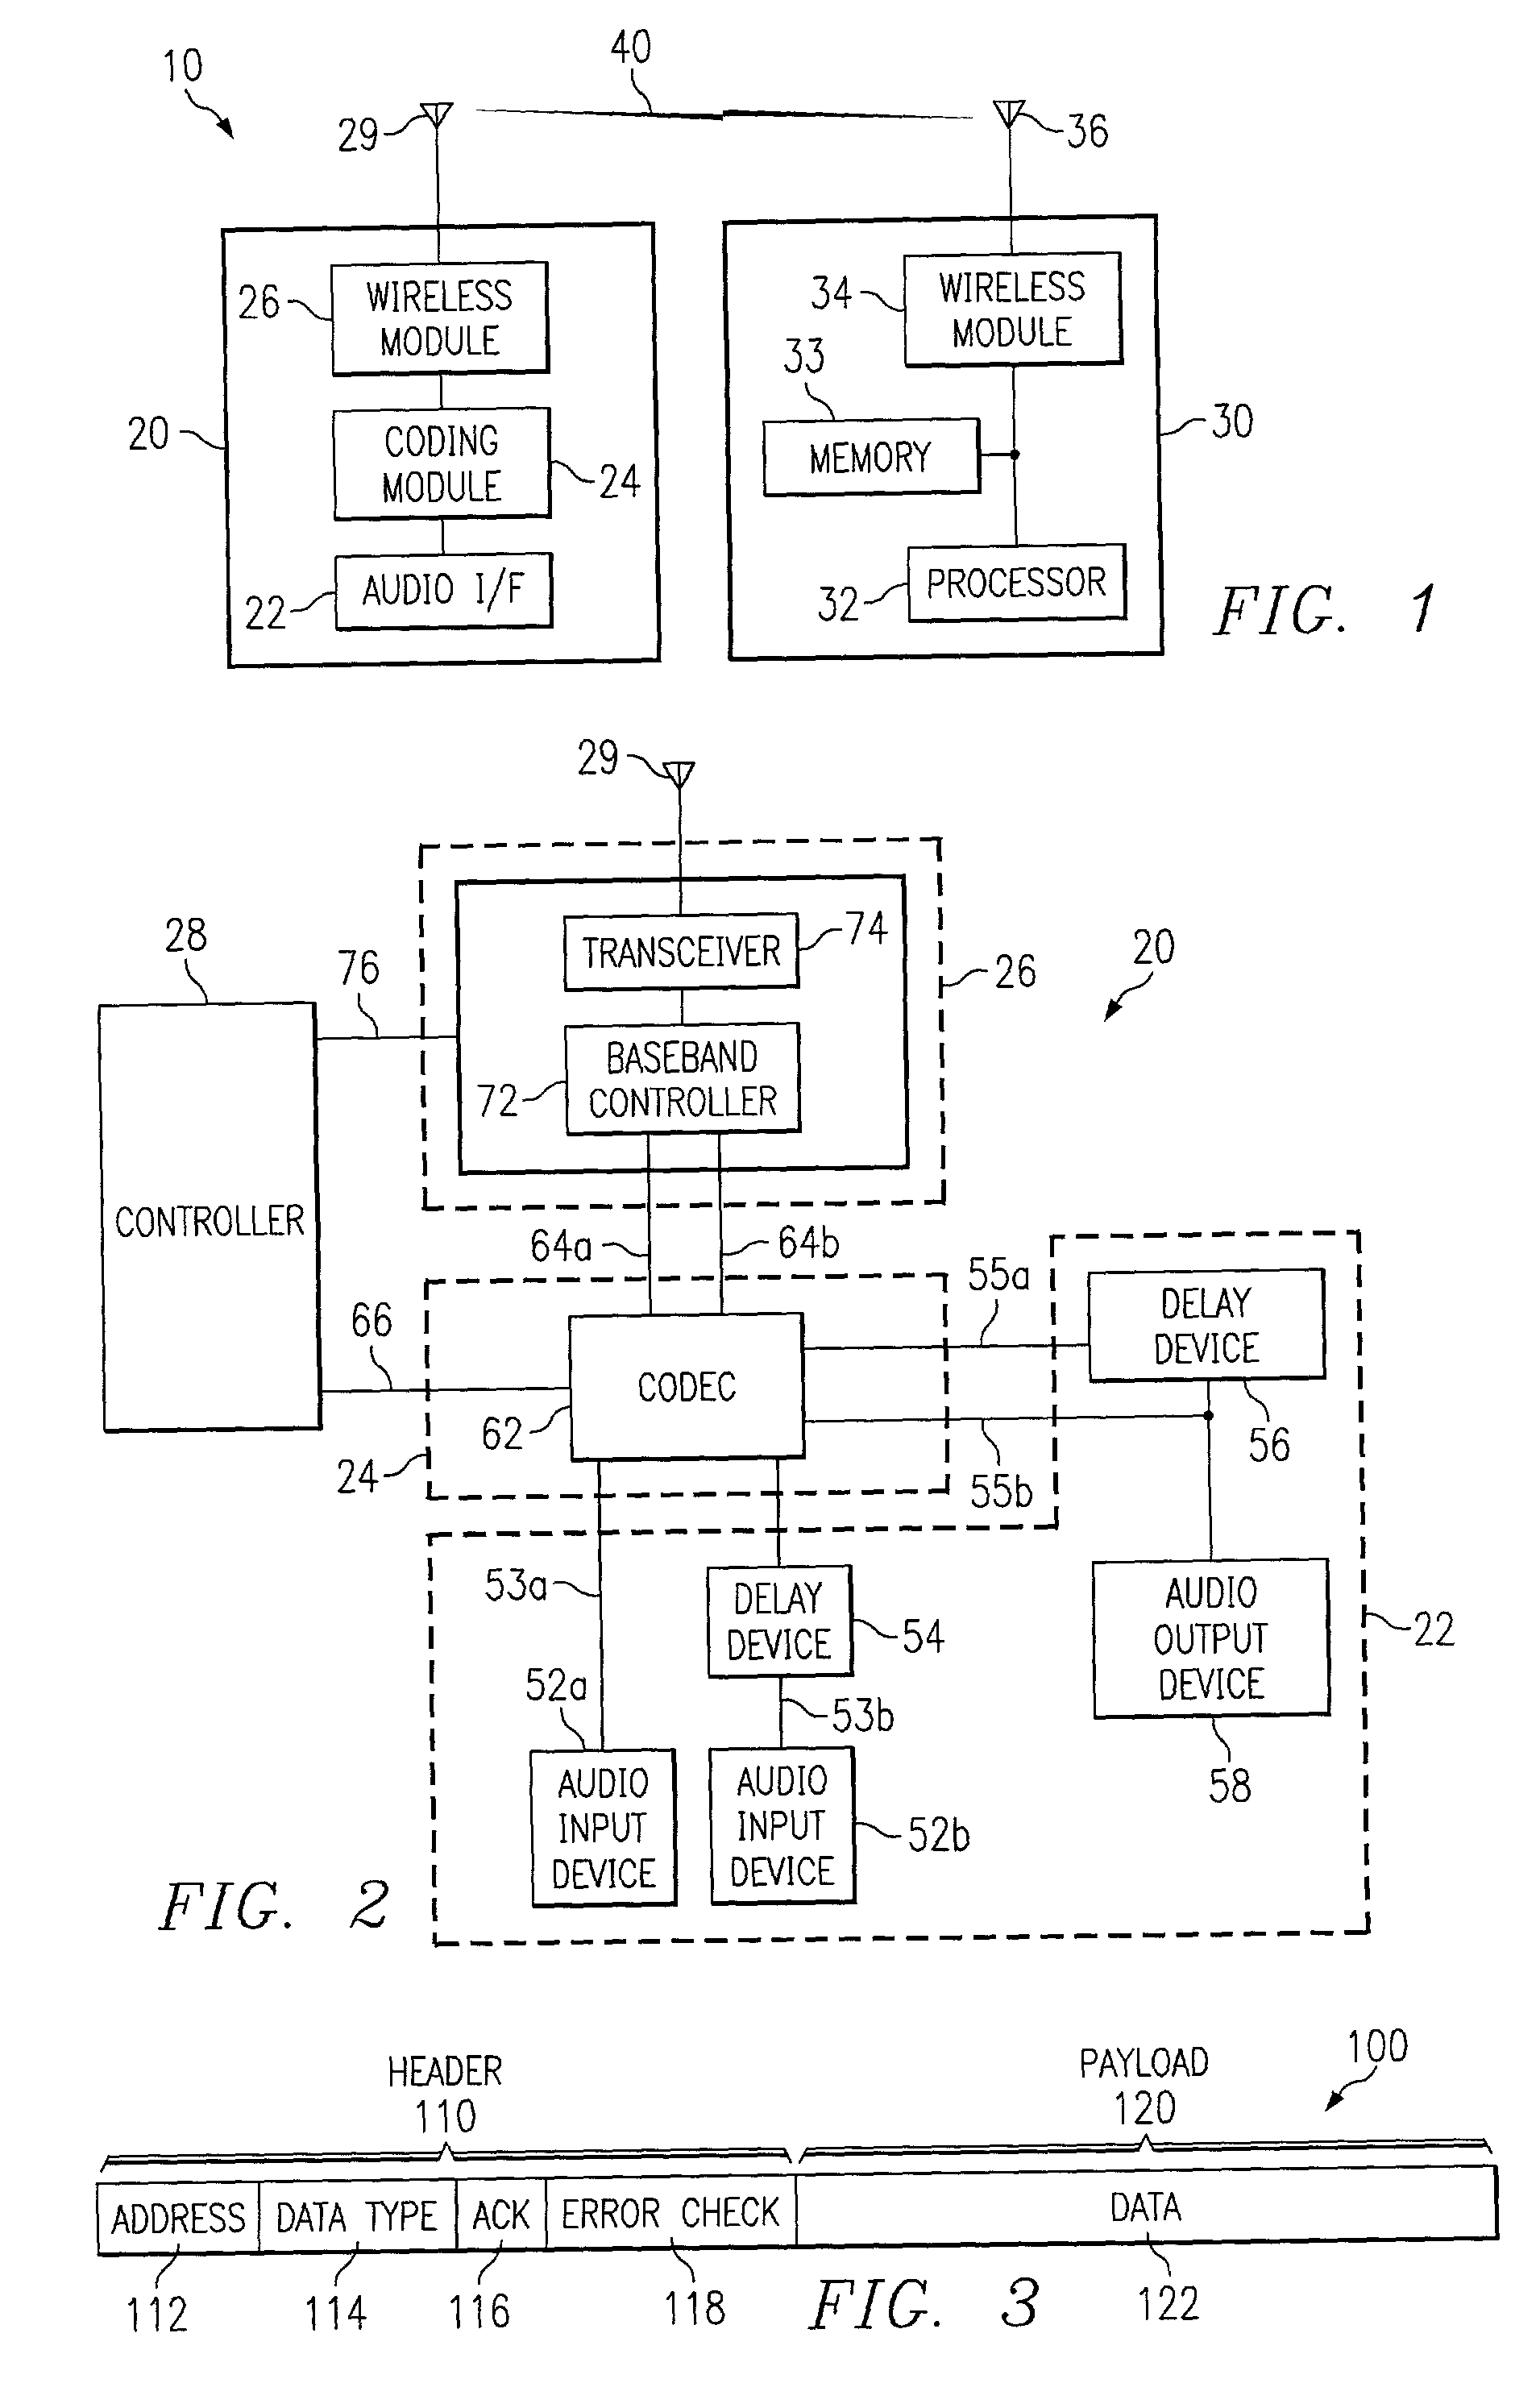 System and method for sending high fidelity sound between wireless units